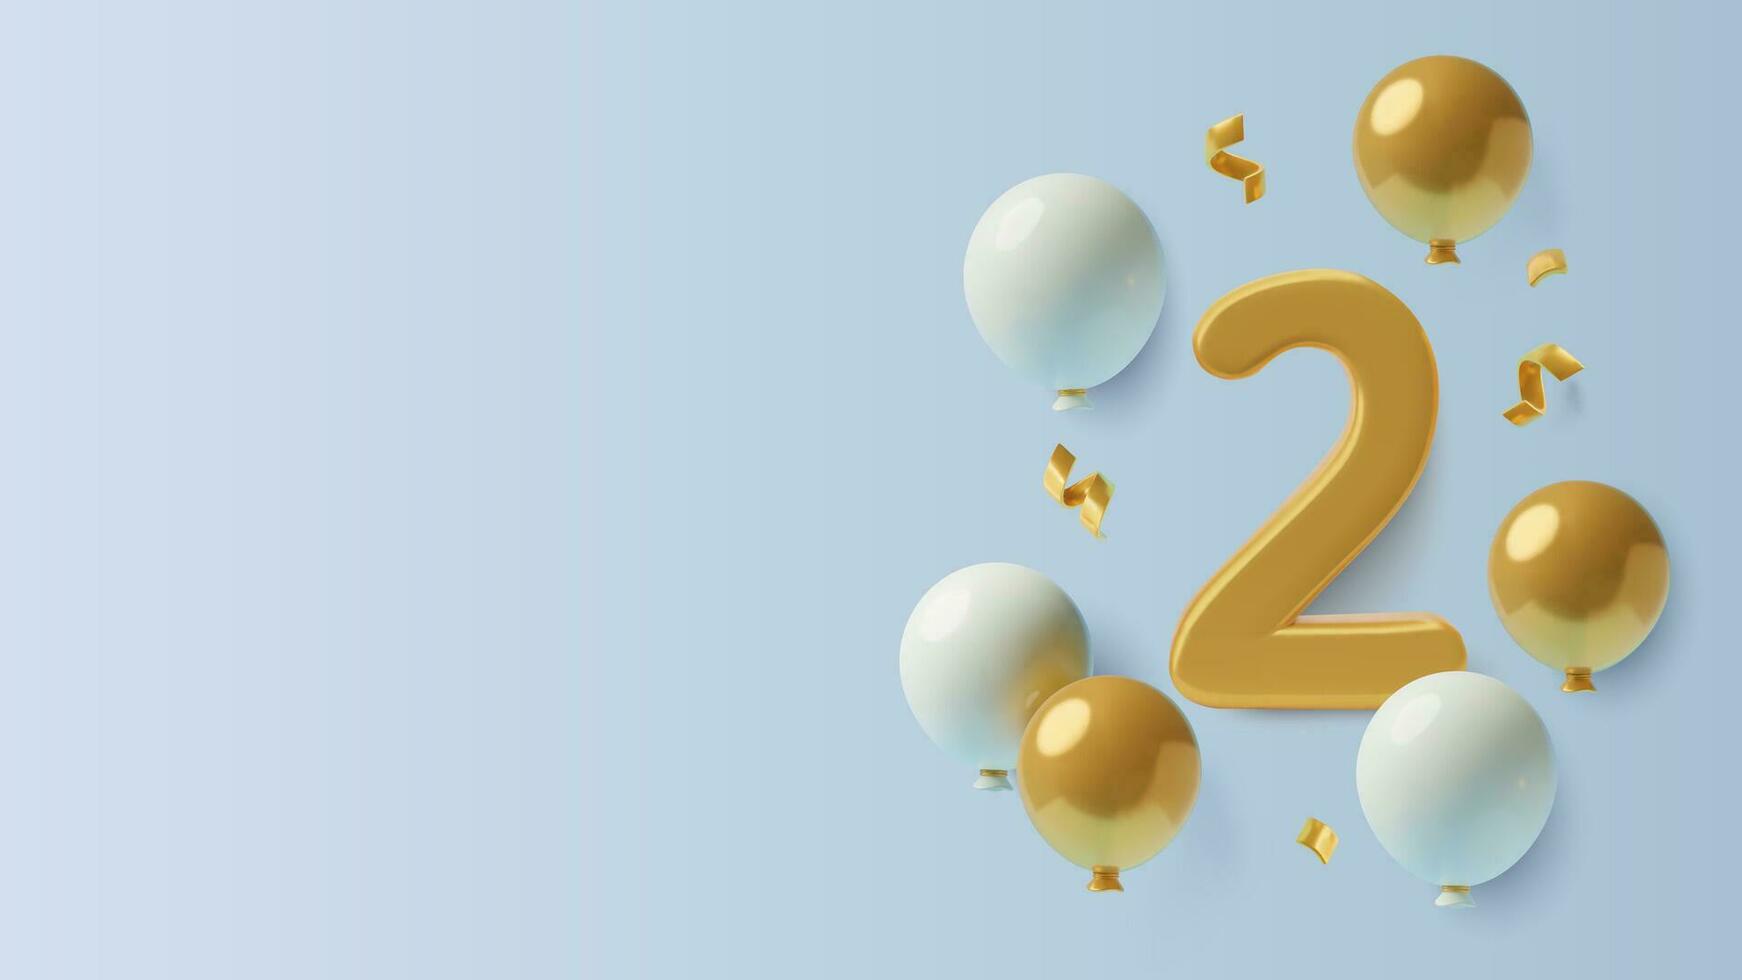 2 years birthday and second anniversary 3D background with big gold number two, flying balloons, curly ribbons and copy space. Realistic three dimensional vector illustration.